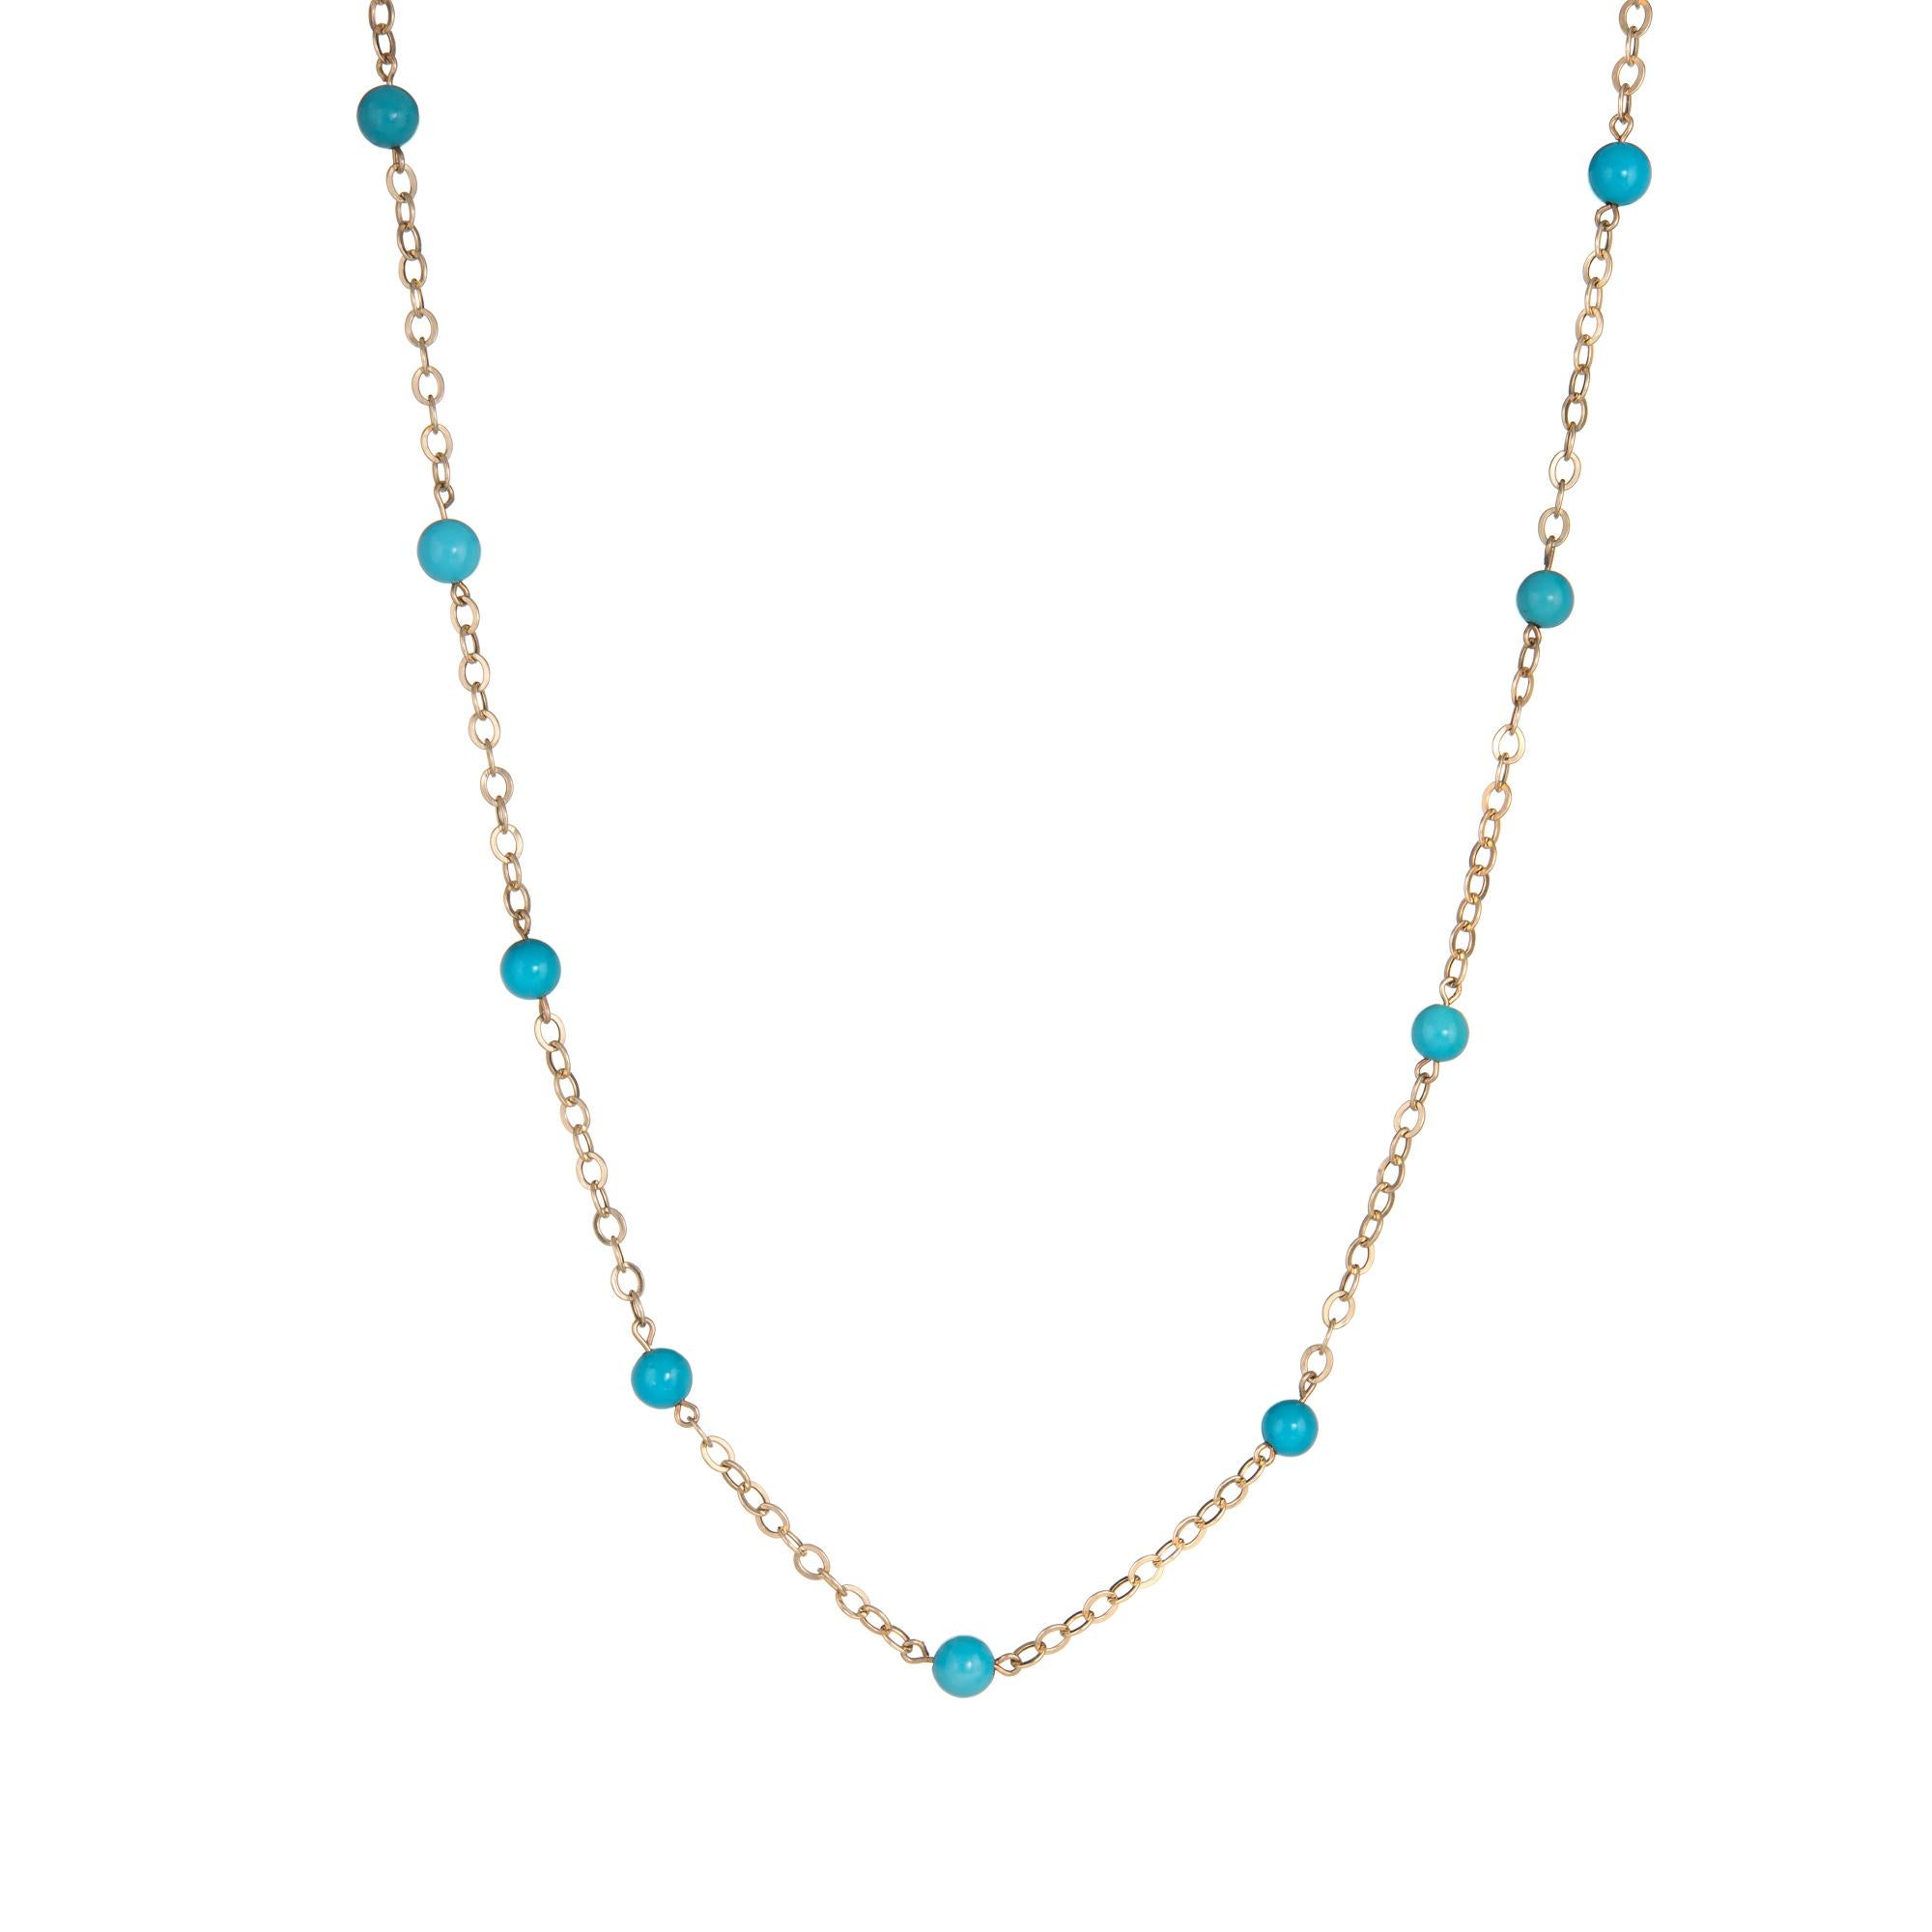 Finely detailed vintage turquoise station necklace crafted in 14k yellow gold.  

Turquoise beads are uniform in size and measure 5mm each. The turquoise is in excellent condition and free of cracks or chips.   

The stylish 19